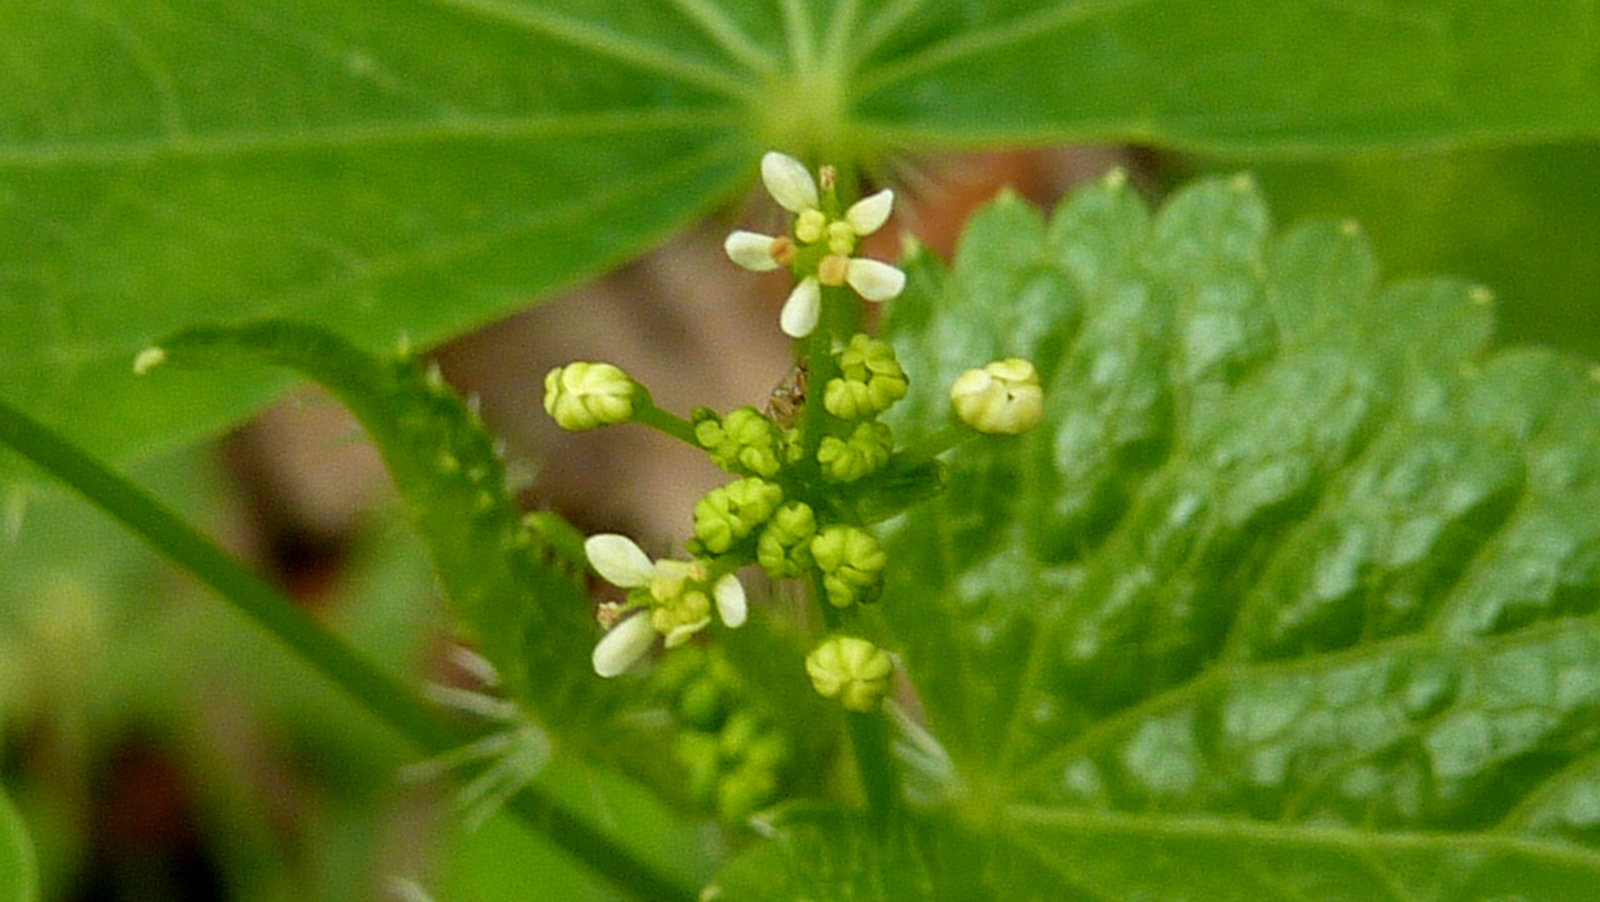 a leaf with little white flowers on it